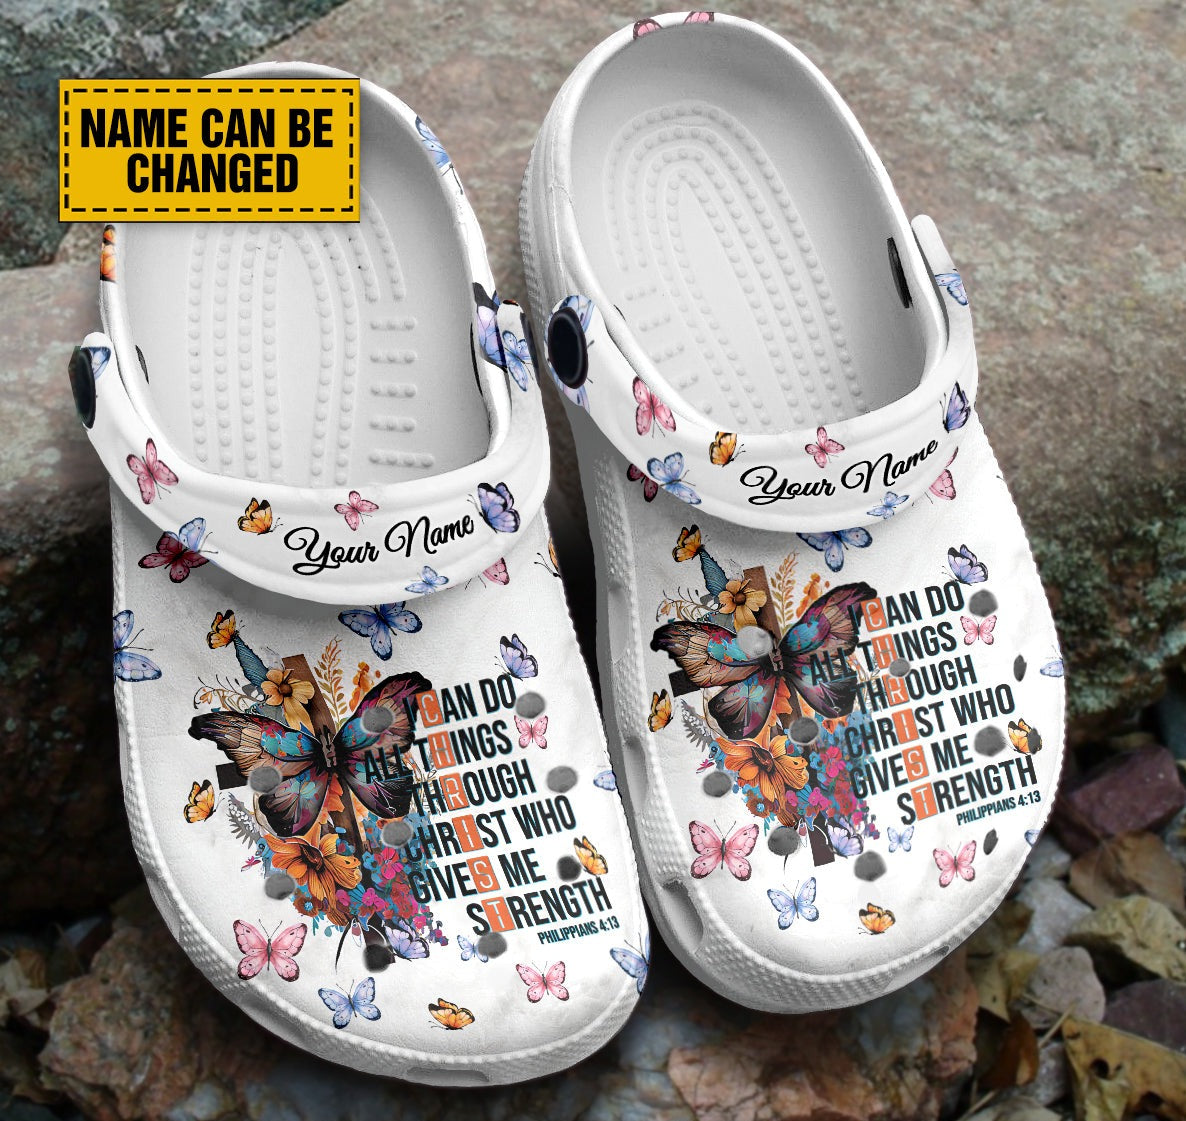 Teesdily | I Can Do All Things Through Christ Who Gives Me Strength Customized Clogs Shoes, Gift For Jesus Lovers, God Faith Believers, Christian Gifts, Kid & Adult Unisex Clogs Shoes Eva